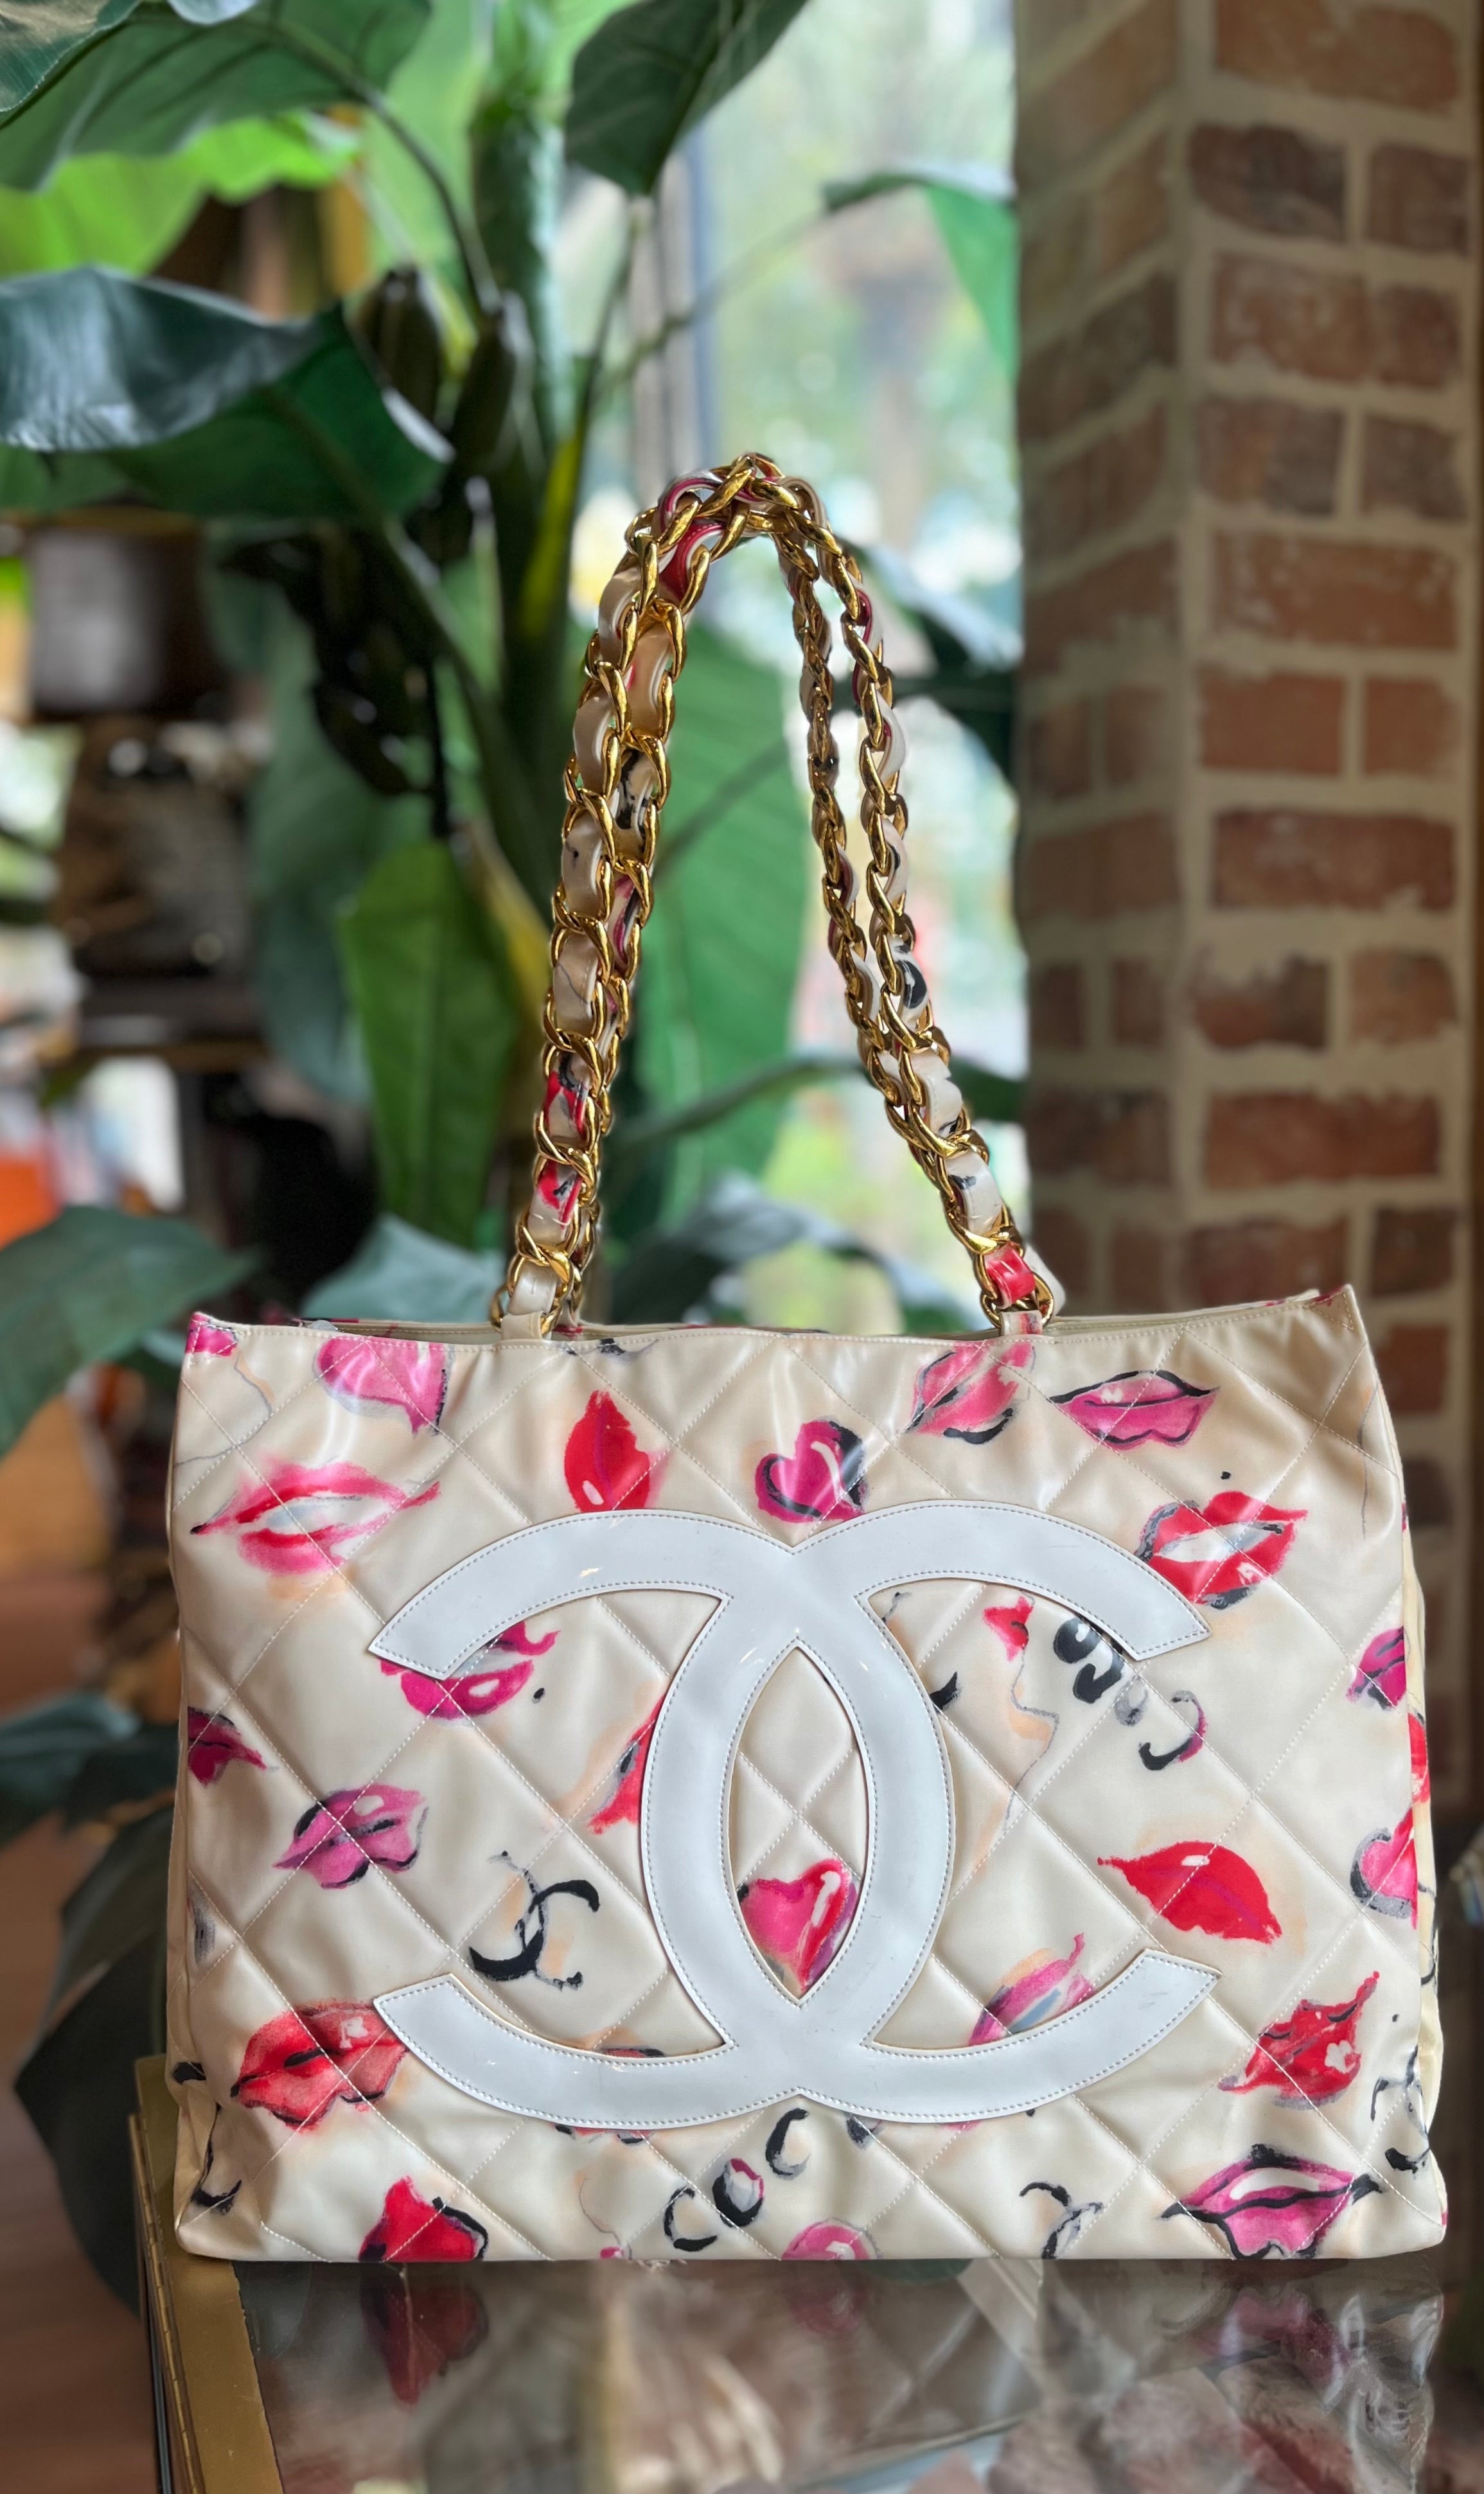 CHANEL Coco Lips and Heart Vinyl Tote - The Purse Ladies